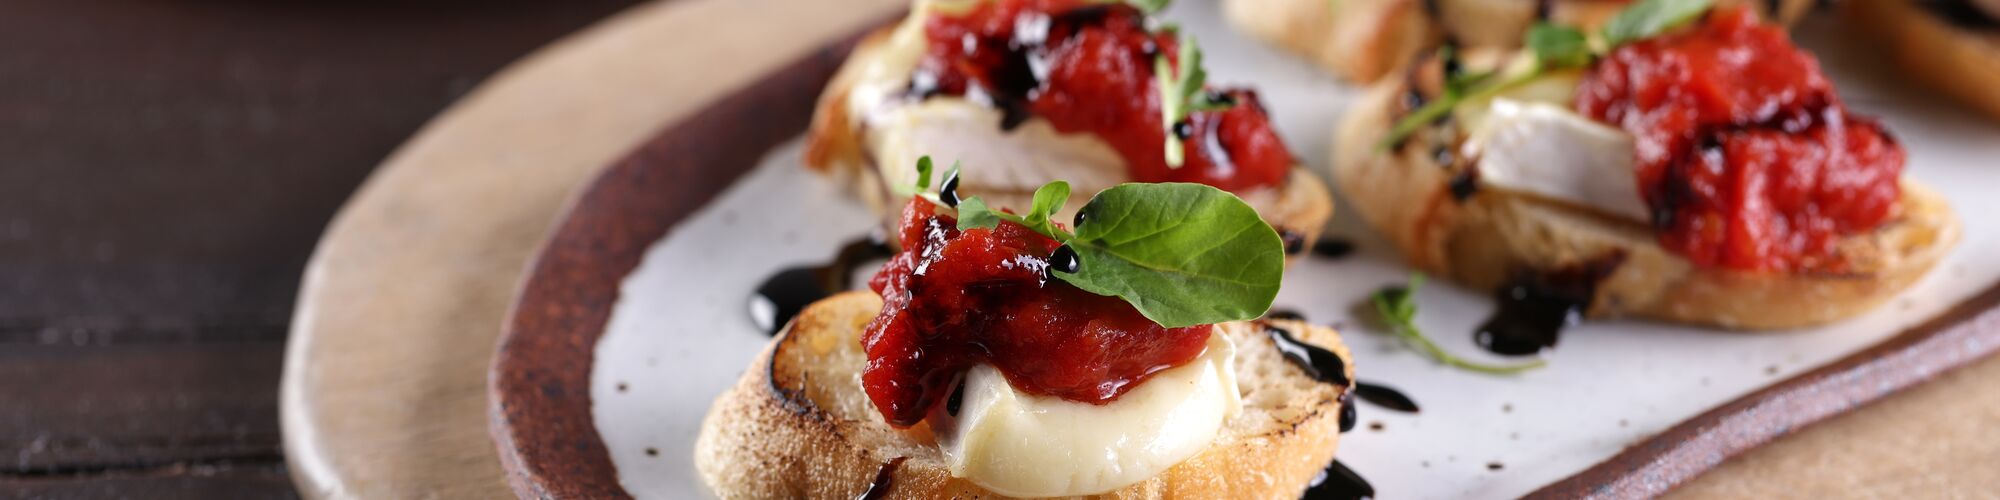 Brie Crostini Topped with Tomato Jam and Balsamic Syrup